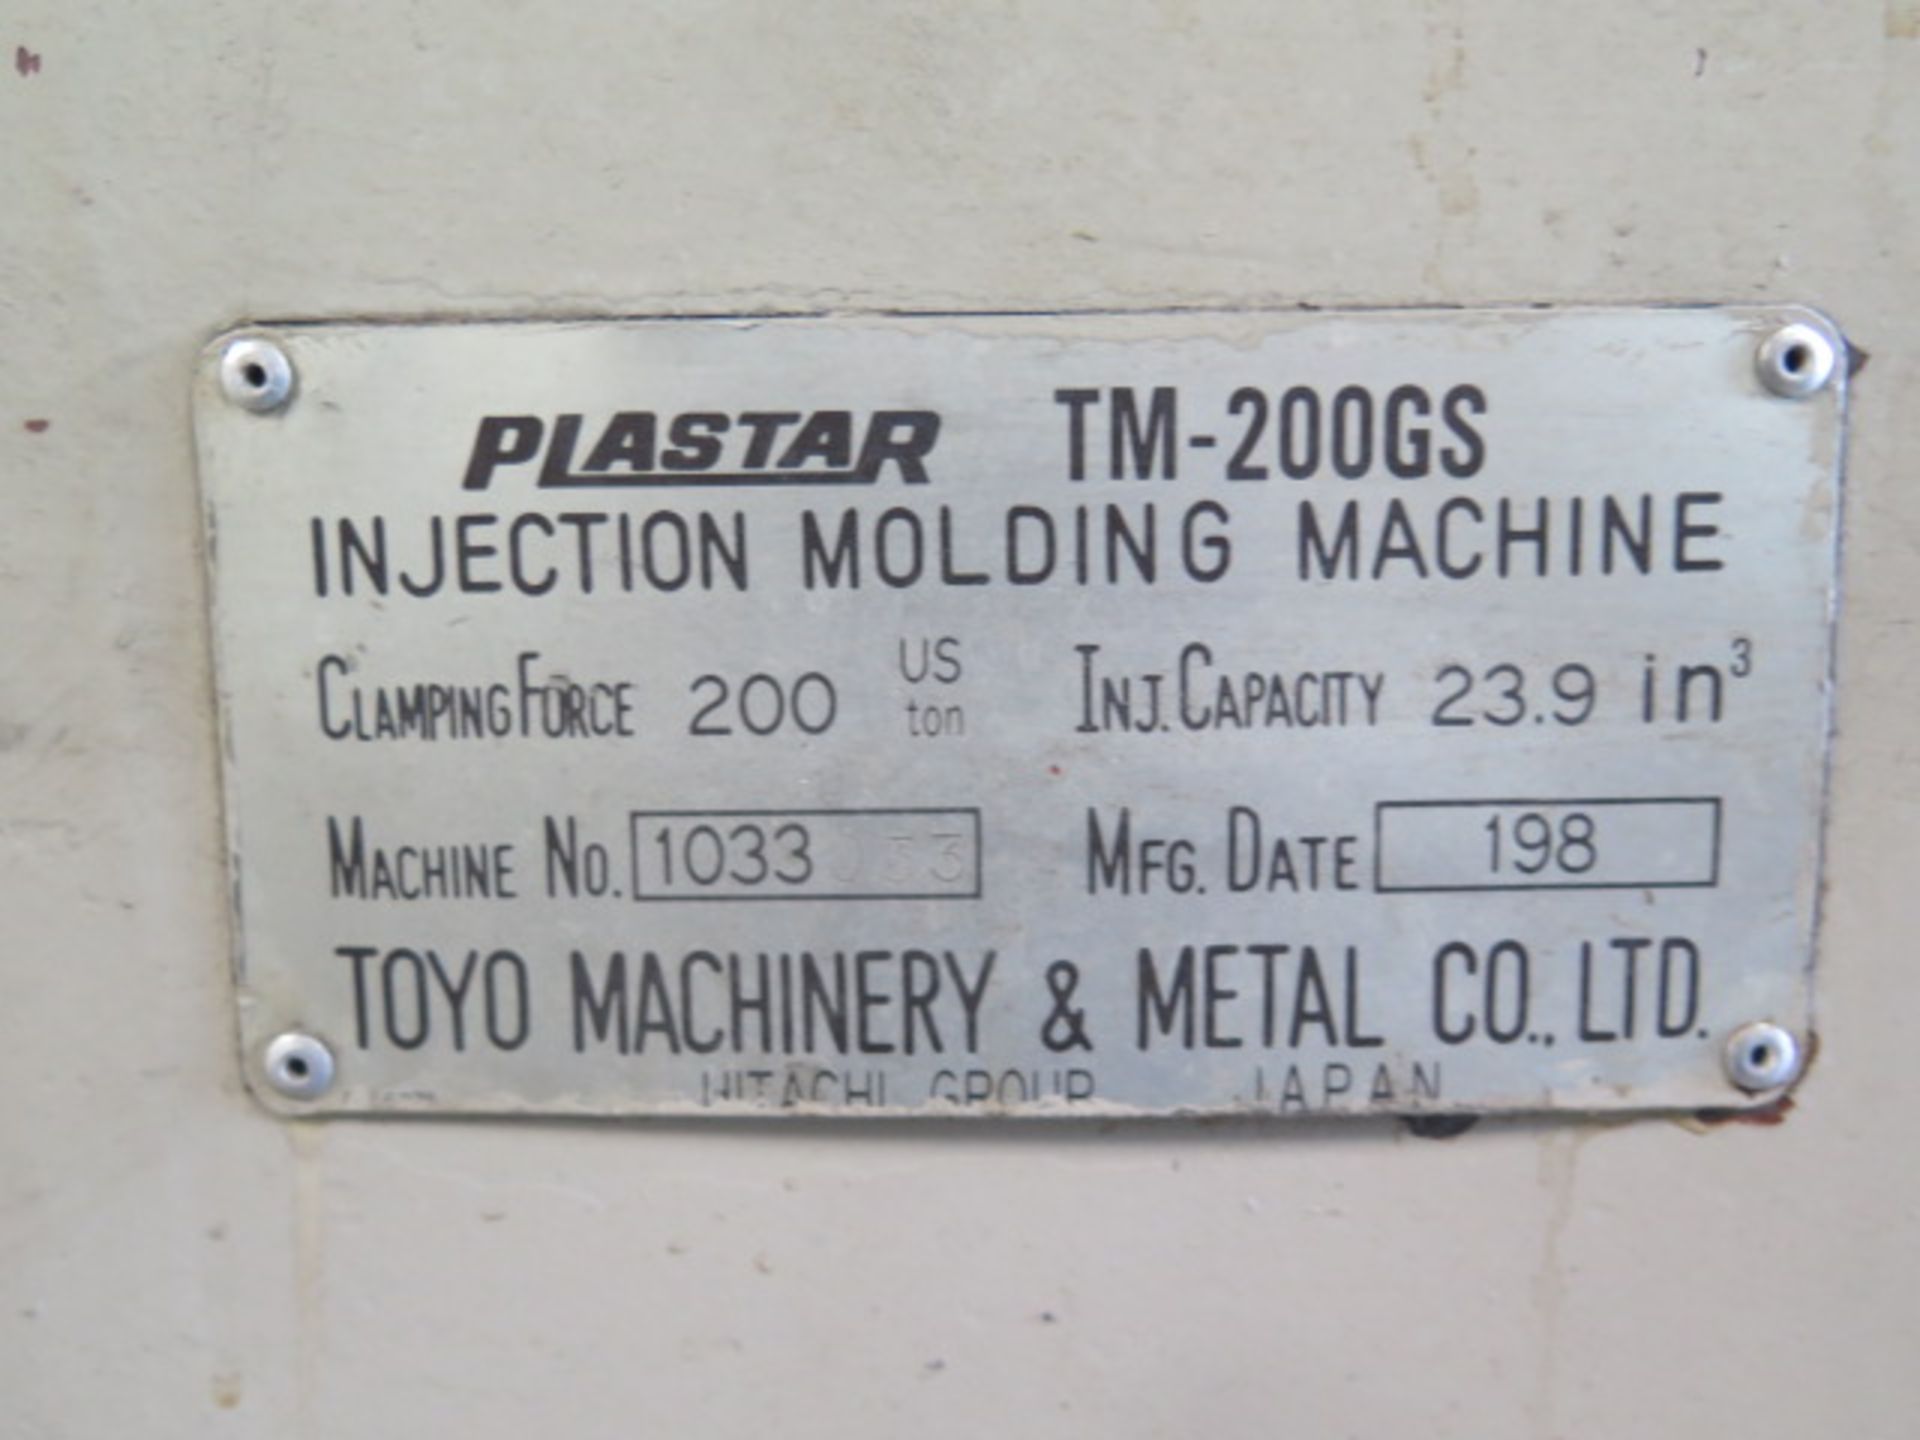 Toyo Machine “Plastar TM-200GS” 200 Ton Plastic Injection Molding Machine s/n 1033033, SOLD AS IS - Image 17 of 17